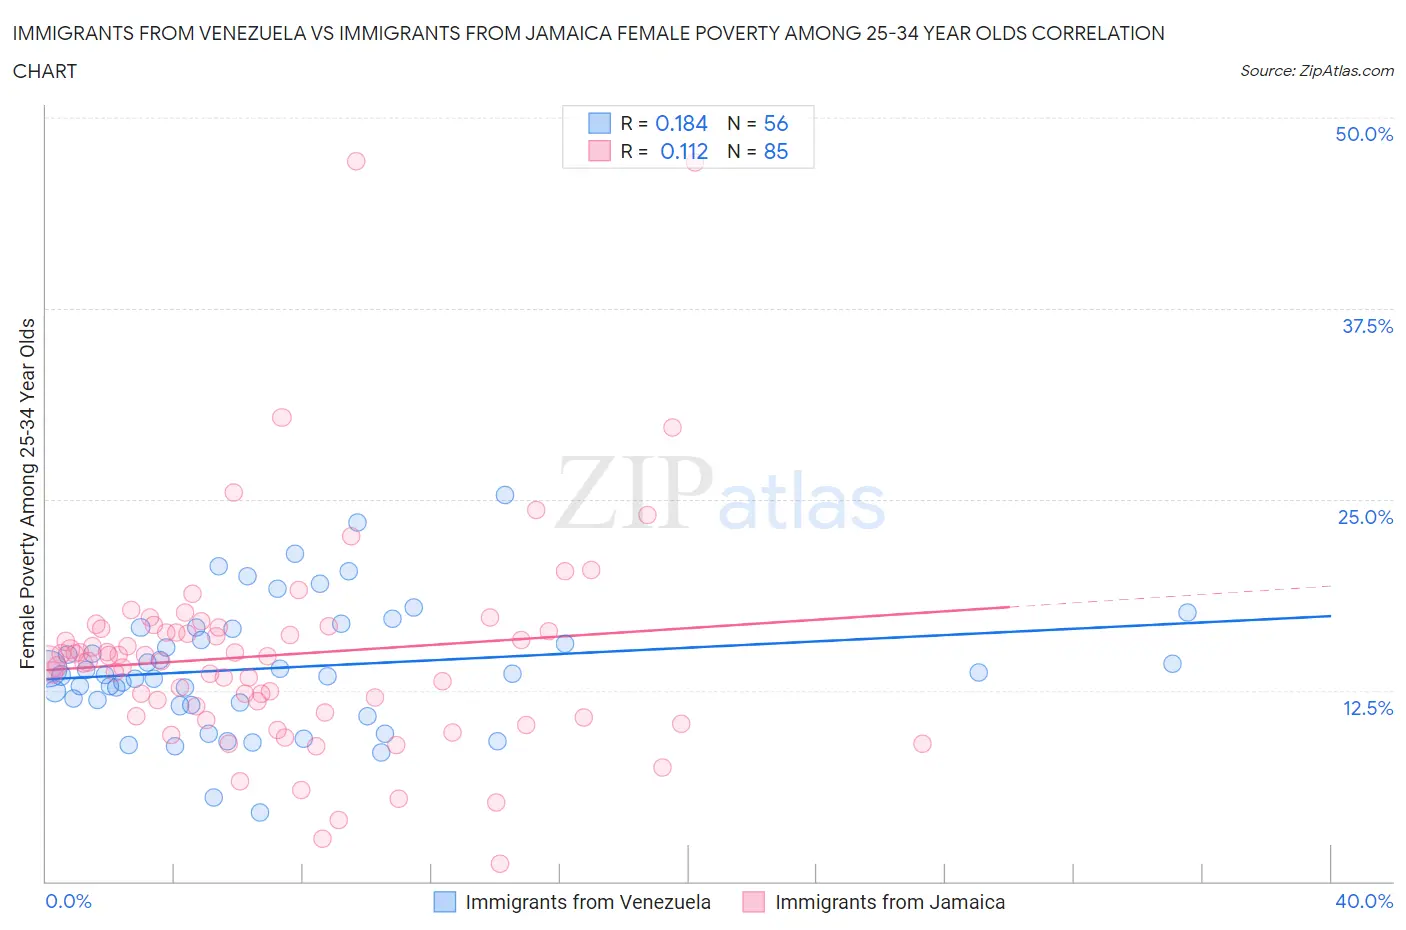 Immigrants from Venezuela vs Immigrants from Jamaica Female Poverty Among 25-34 Year Olds